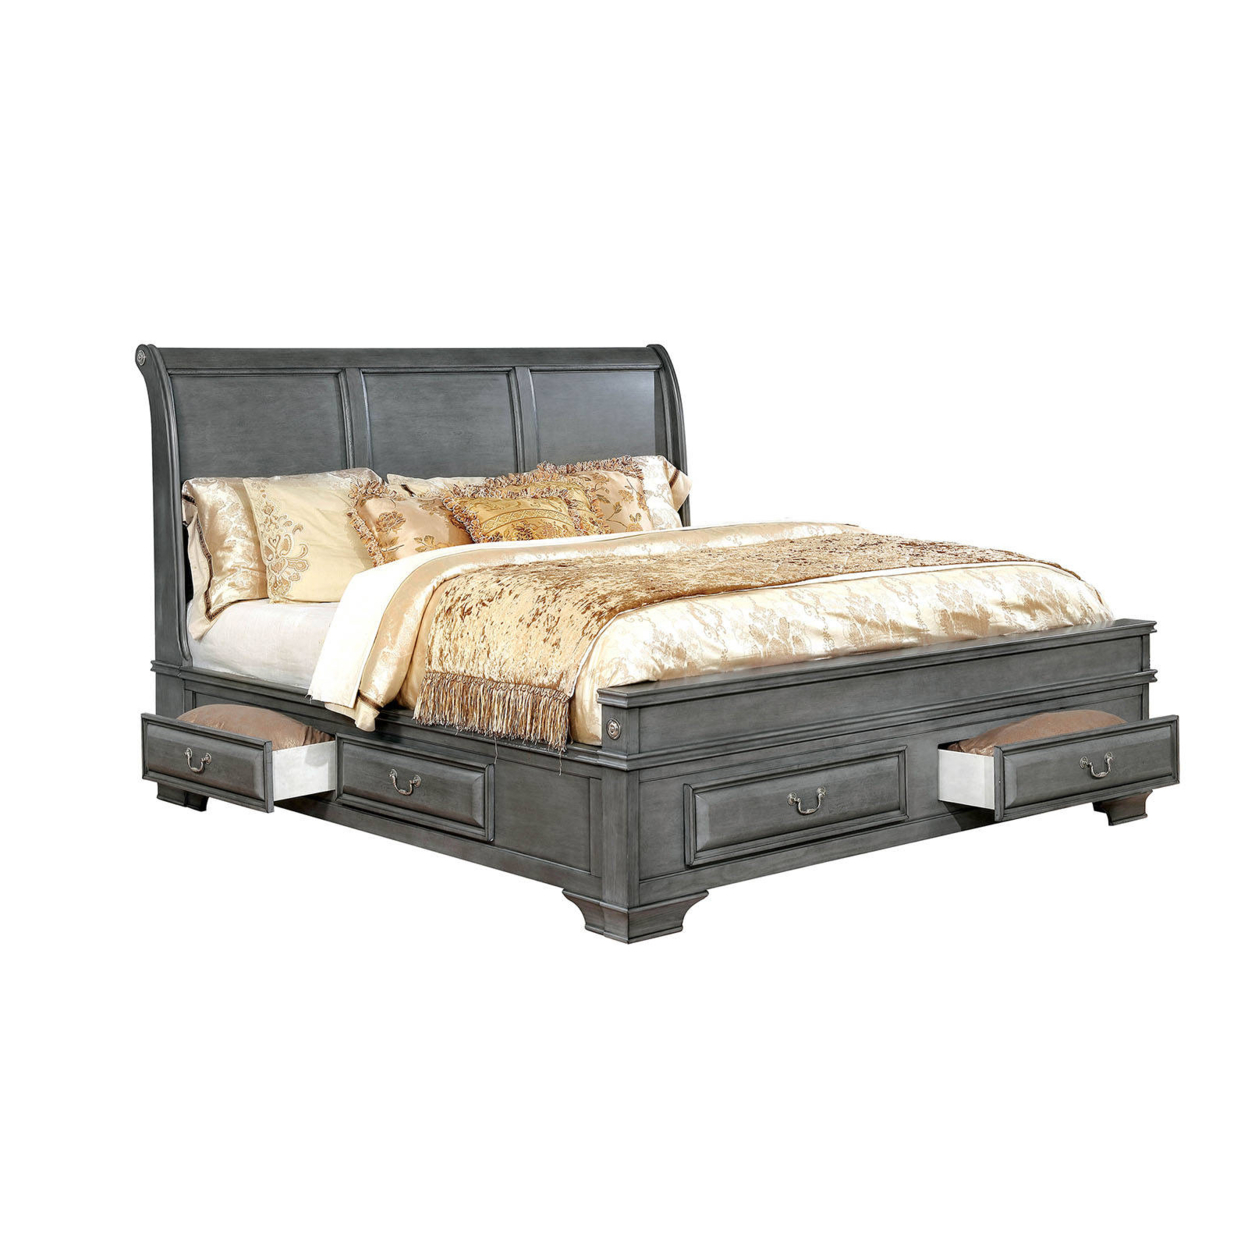 Transitional California King Wooden Bed With Multiple Bottom Drawers, Gray- Saltoro Sherpi